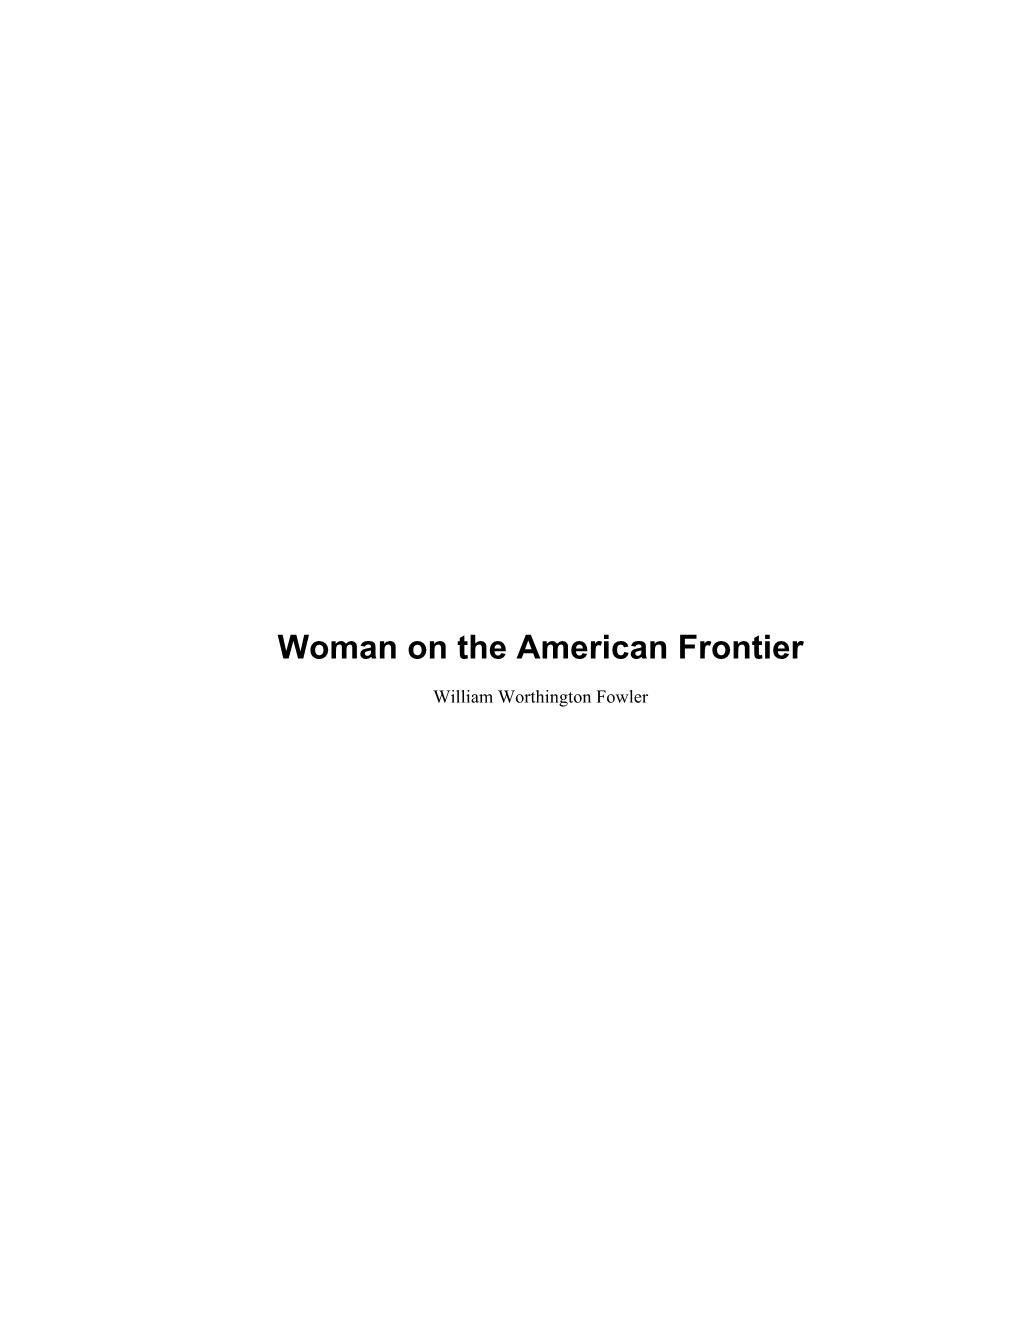 Woman on the American Frontier